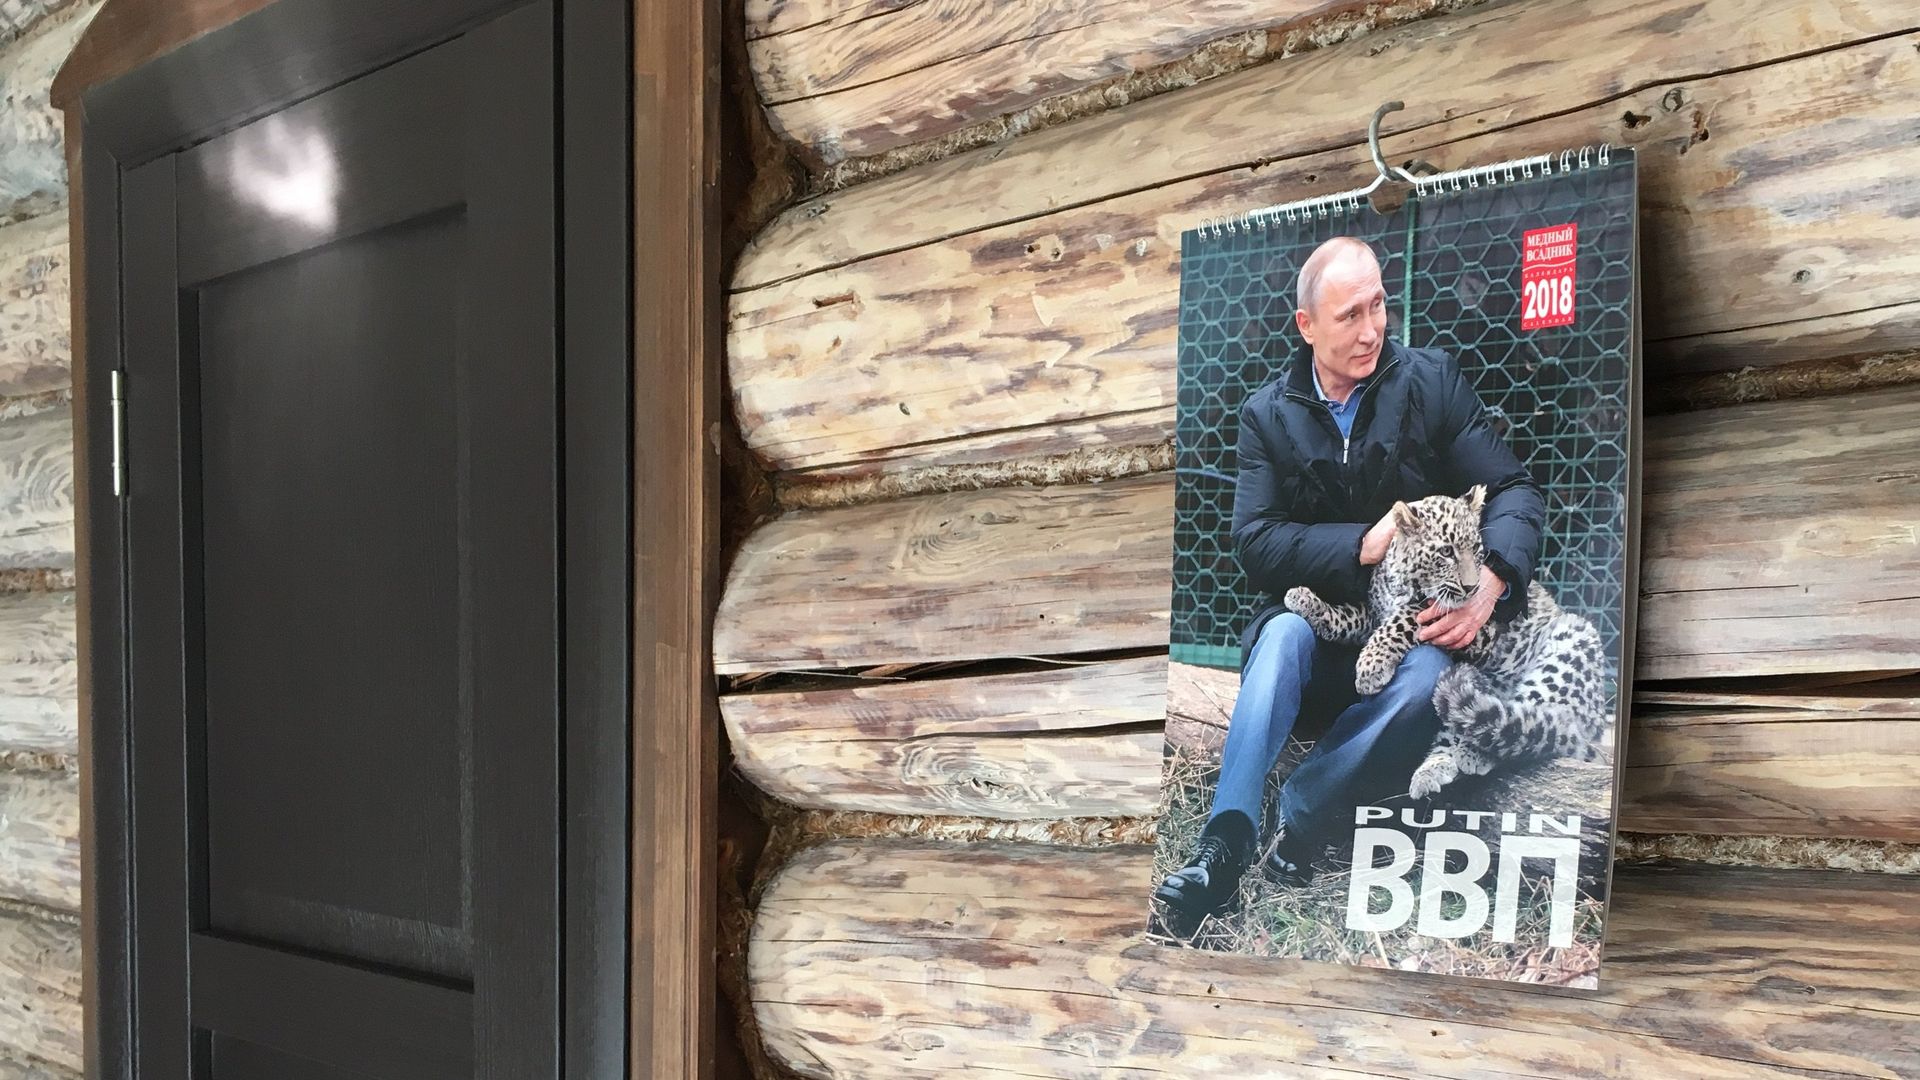 A calendar with photos of the Russian President Vladimir Putin is hanging on a wall in Moscow, Russia